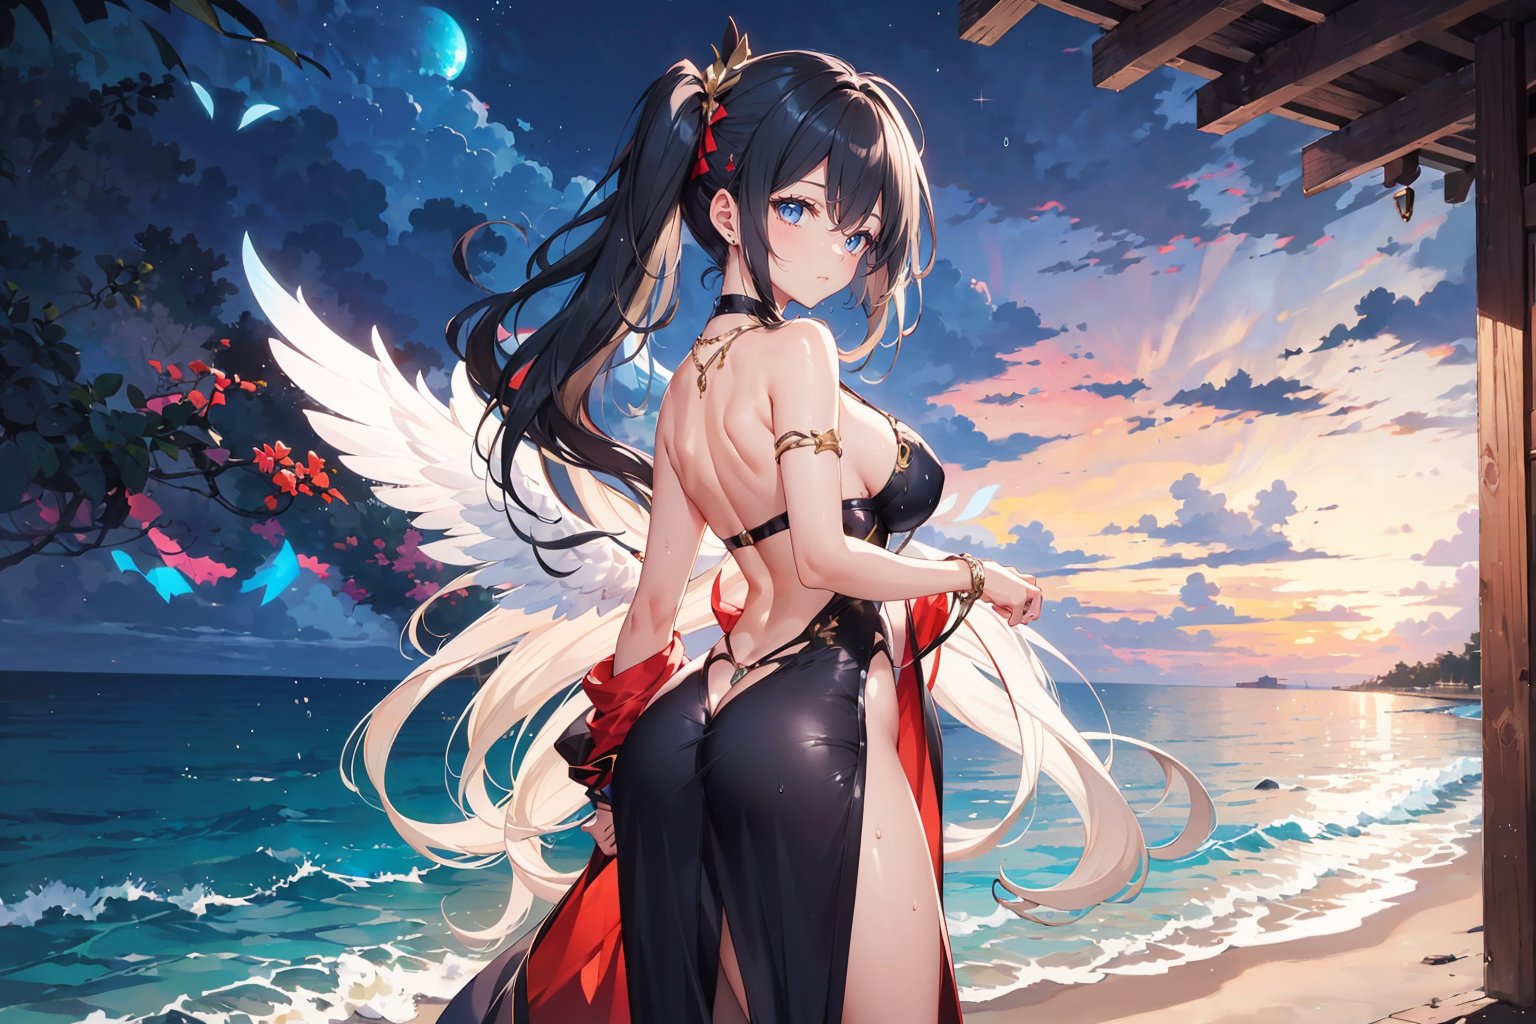 A young woman with long, flowing black locks styled in loose pigtails and adorned with a delicate necklace, stands at the beach on a drizzly evening. The wavy hair cascades down her back as she gazes out at the rain-kissed waves. She wears a breastless evening gown that shimmers in the moonlight, paired with sheer stockings and high heels that seem to defy the wet weather. Above all, a pair of ethereal angel wings sprout from her shoulders, adding an air of whimsy to this surreal scene.